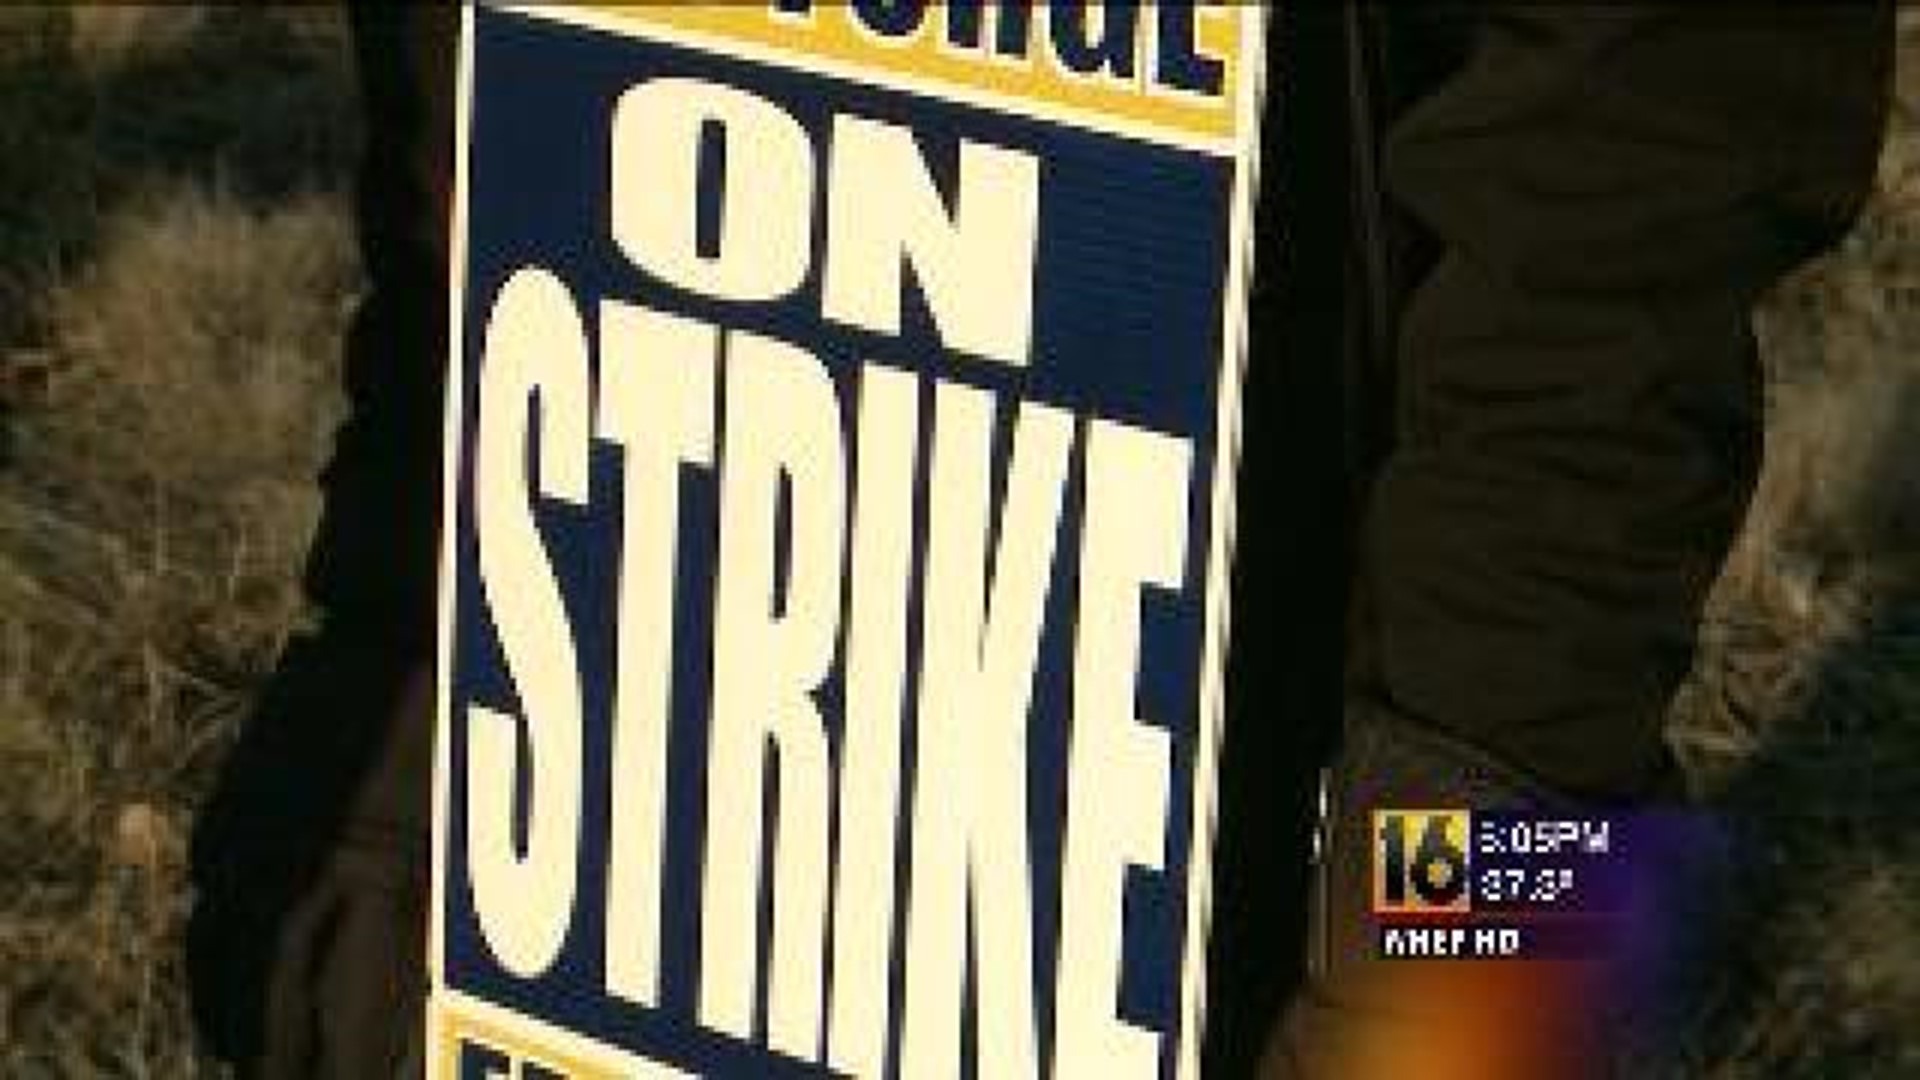 Community Reacts to Old Forge Strike